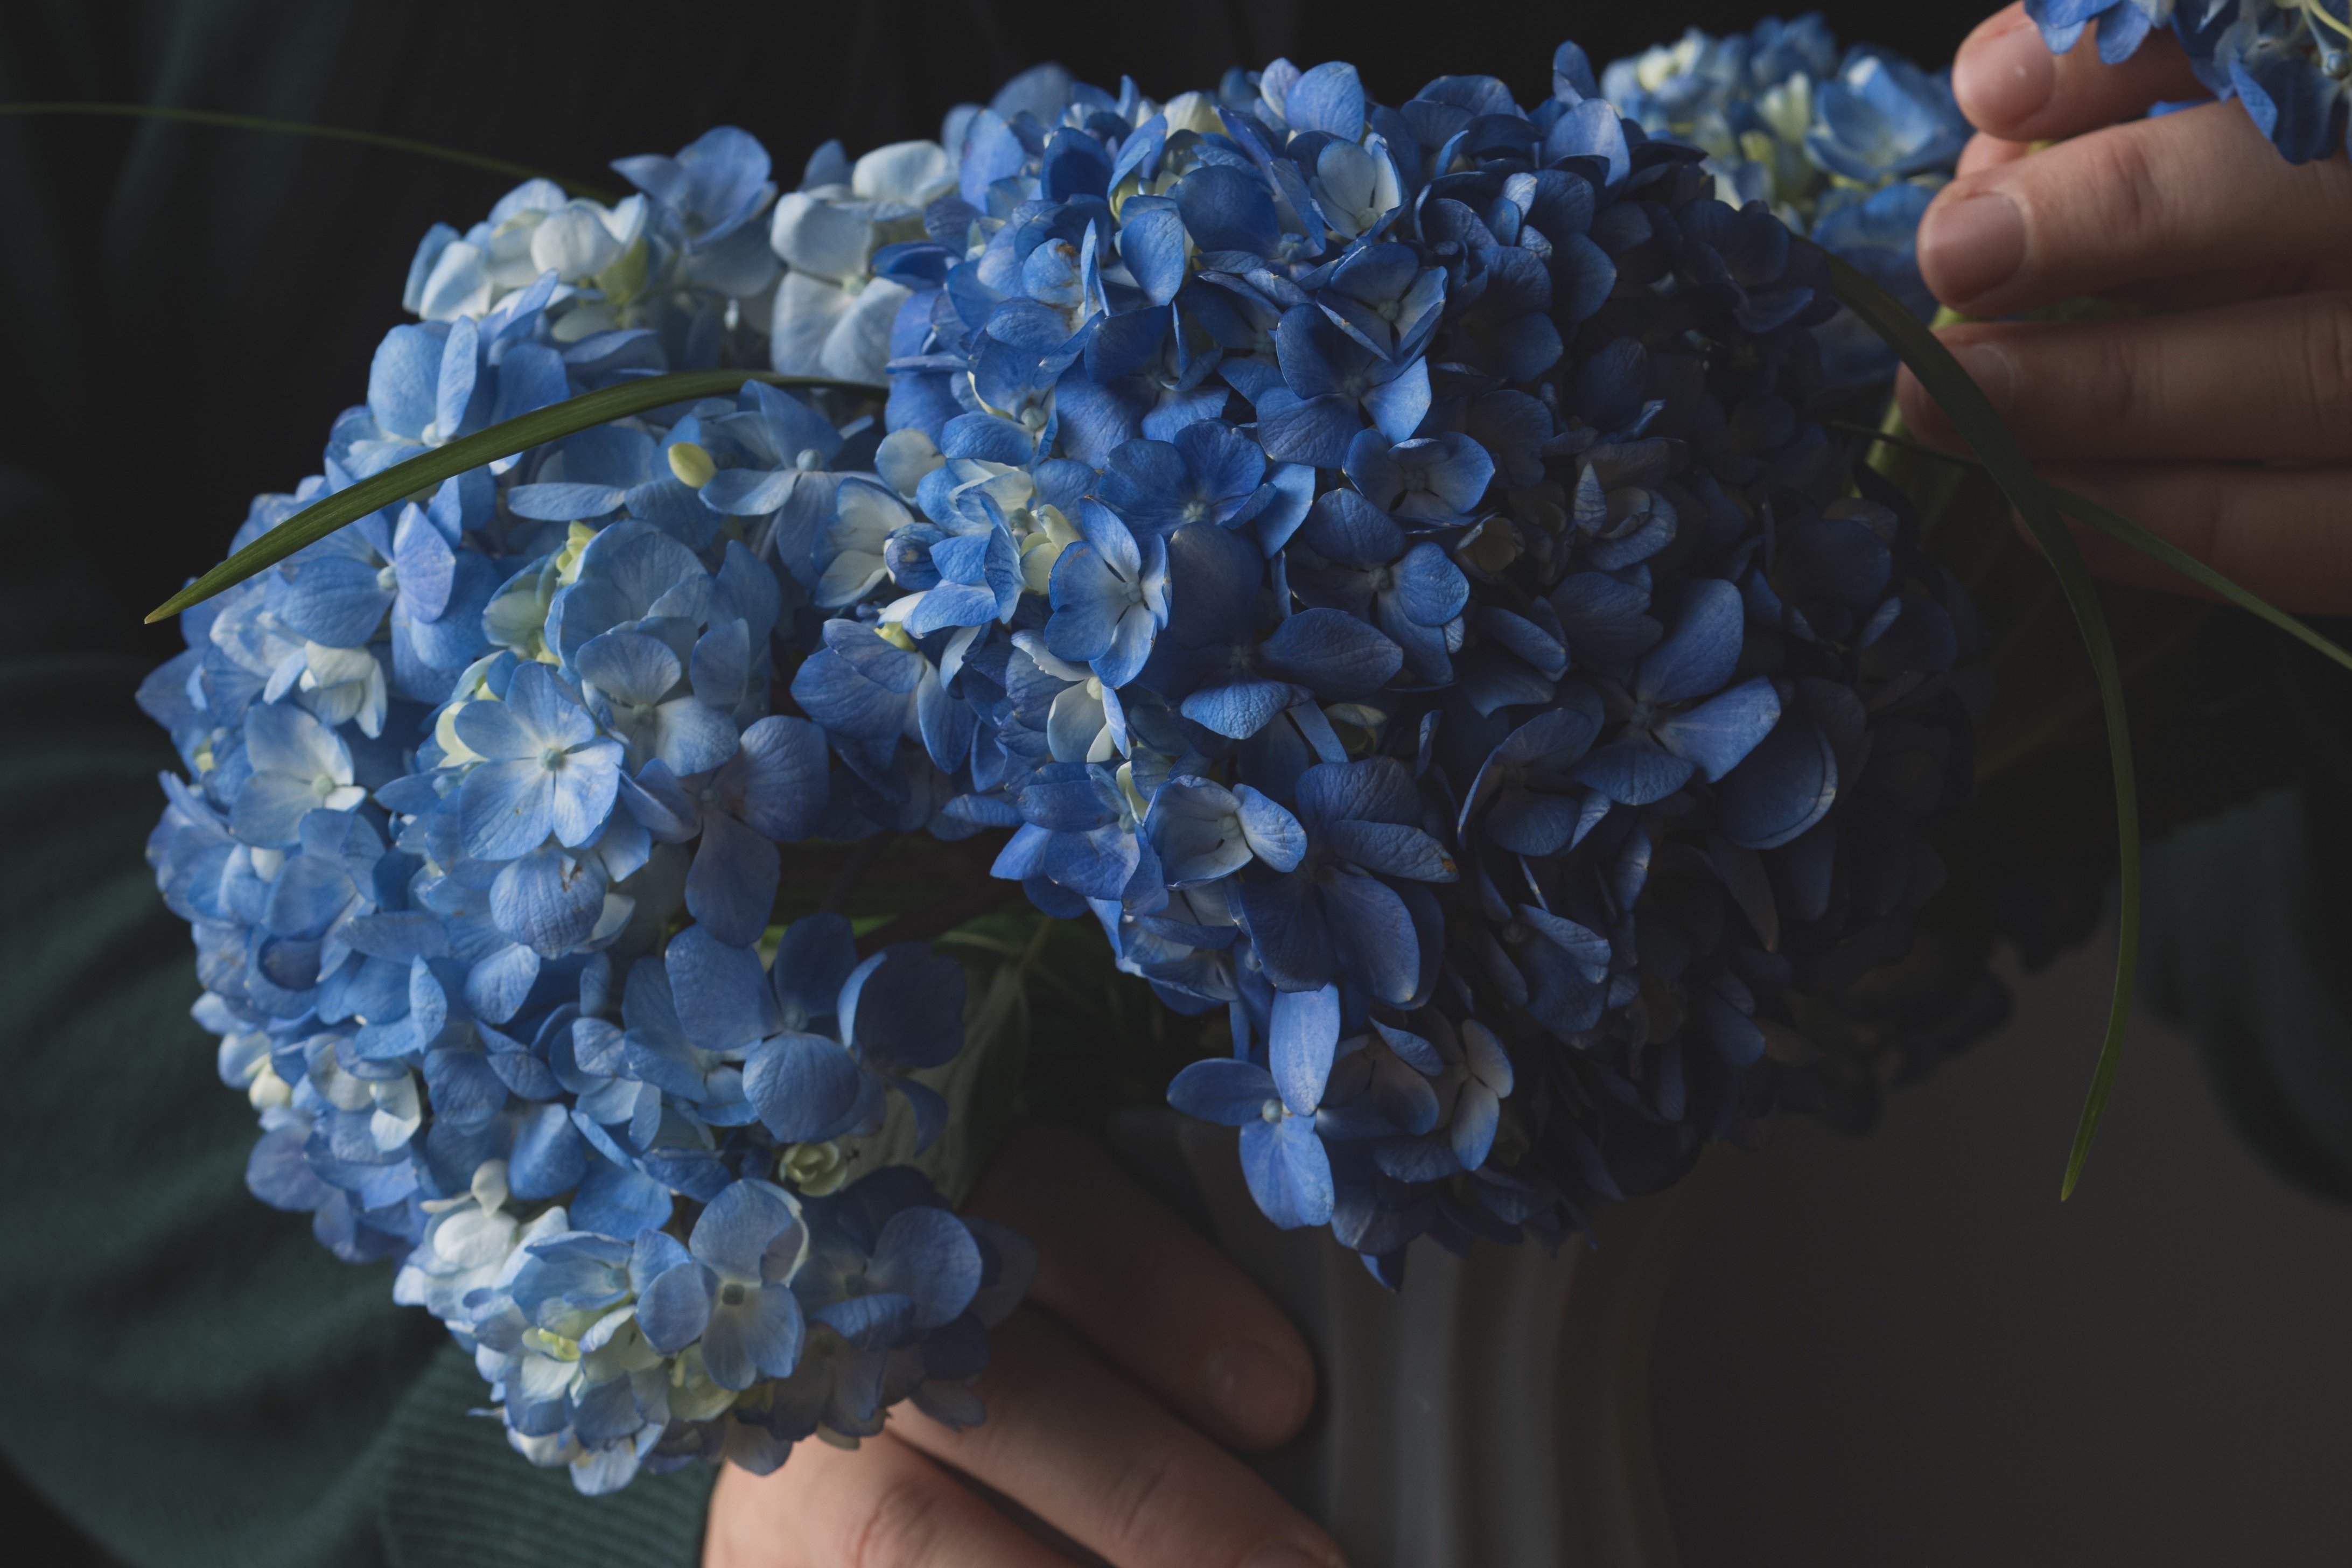 Sam brought her a bouquet of hydrangeas, and Olivia tried to contain her emotions. | Source: Pexels